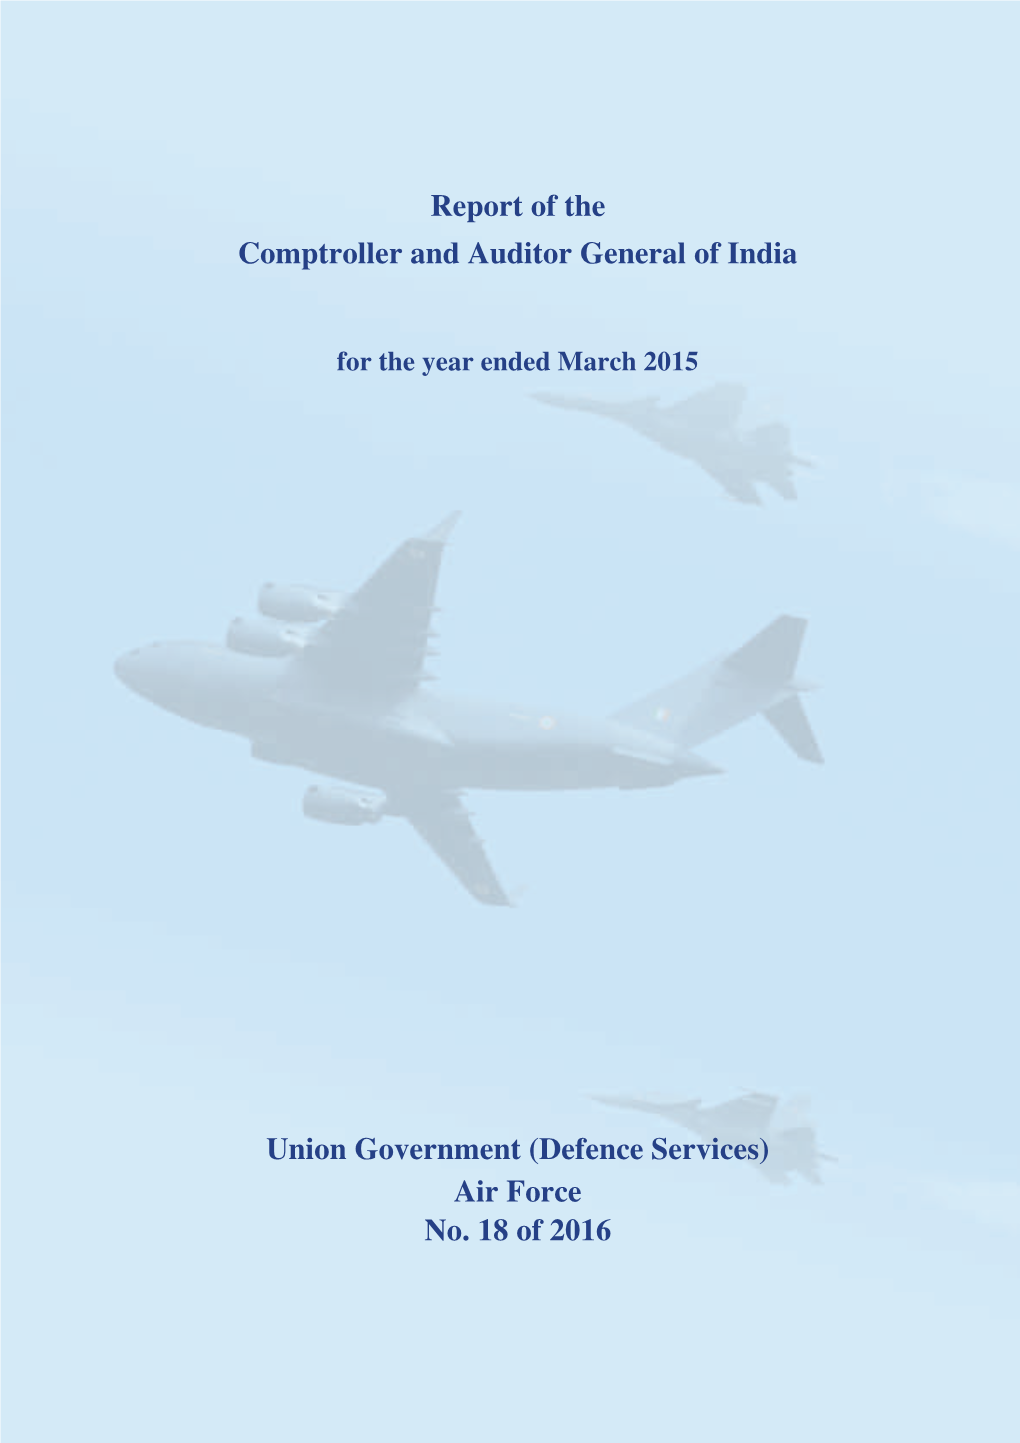 Union Defence Services Air Force